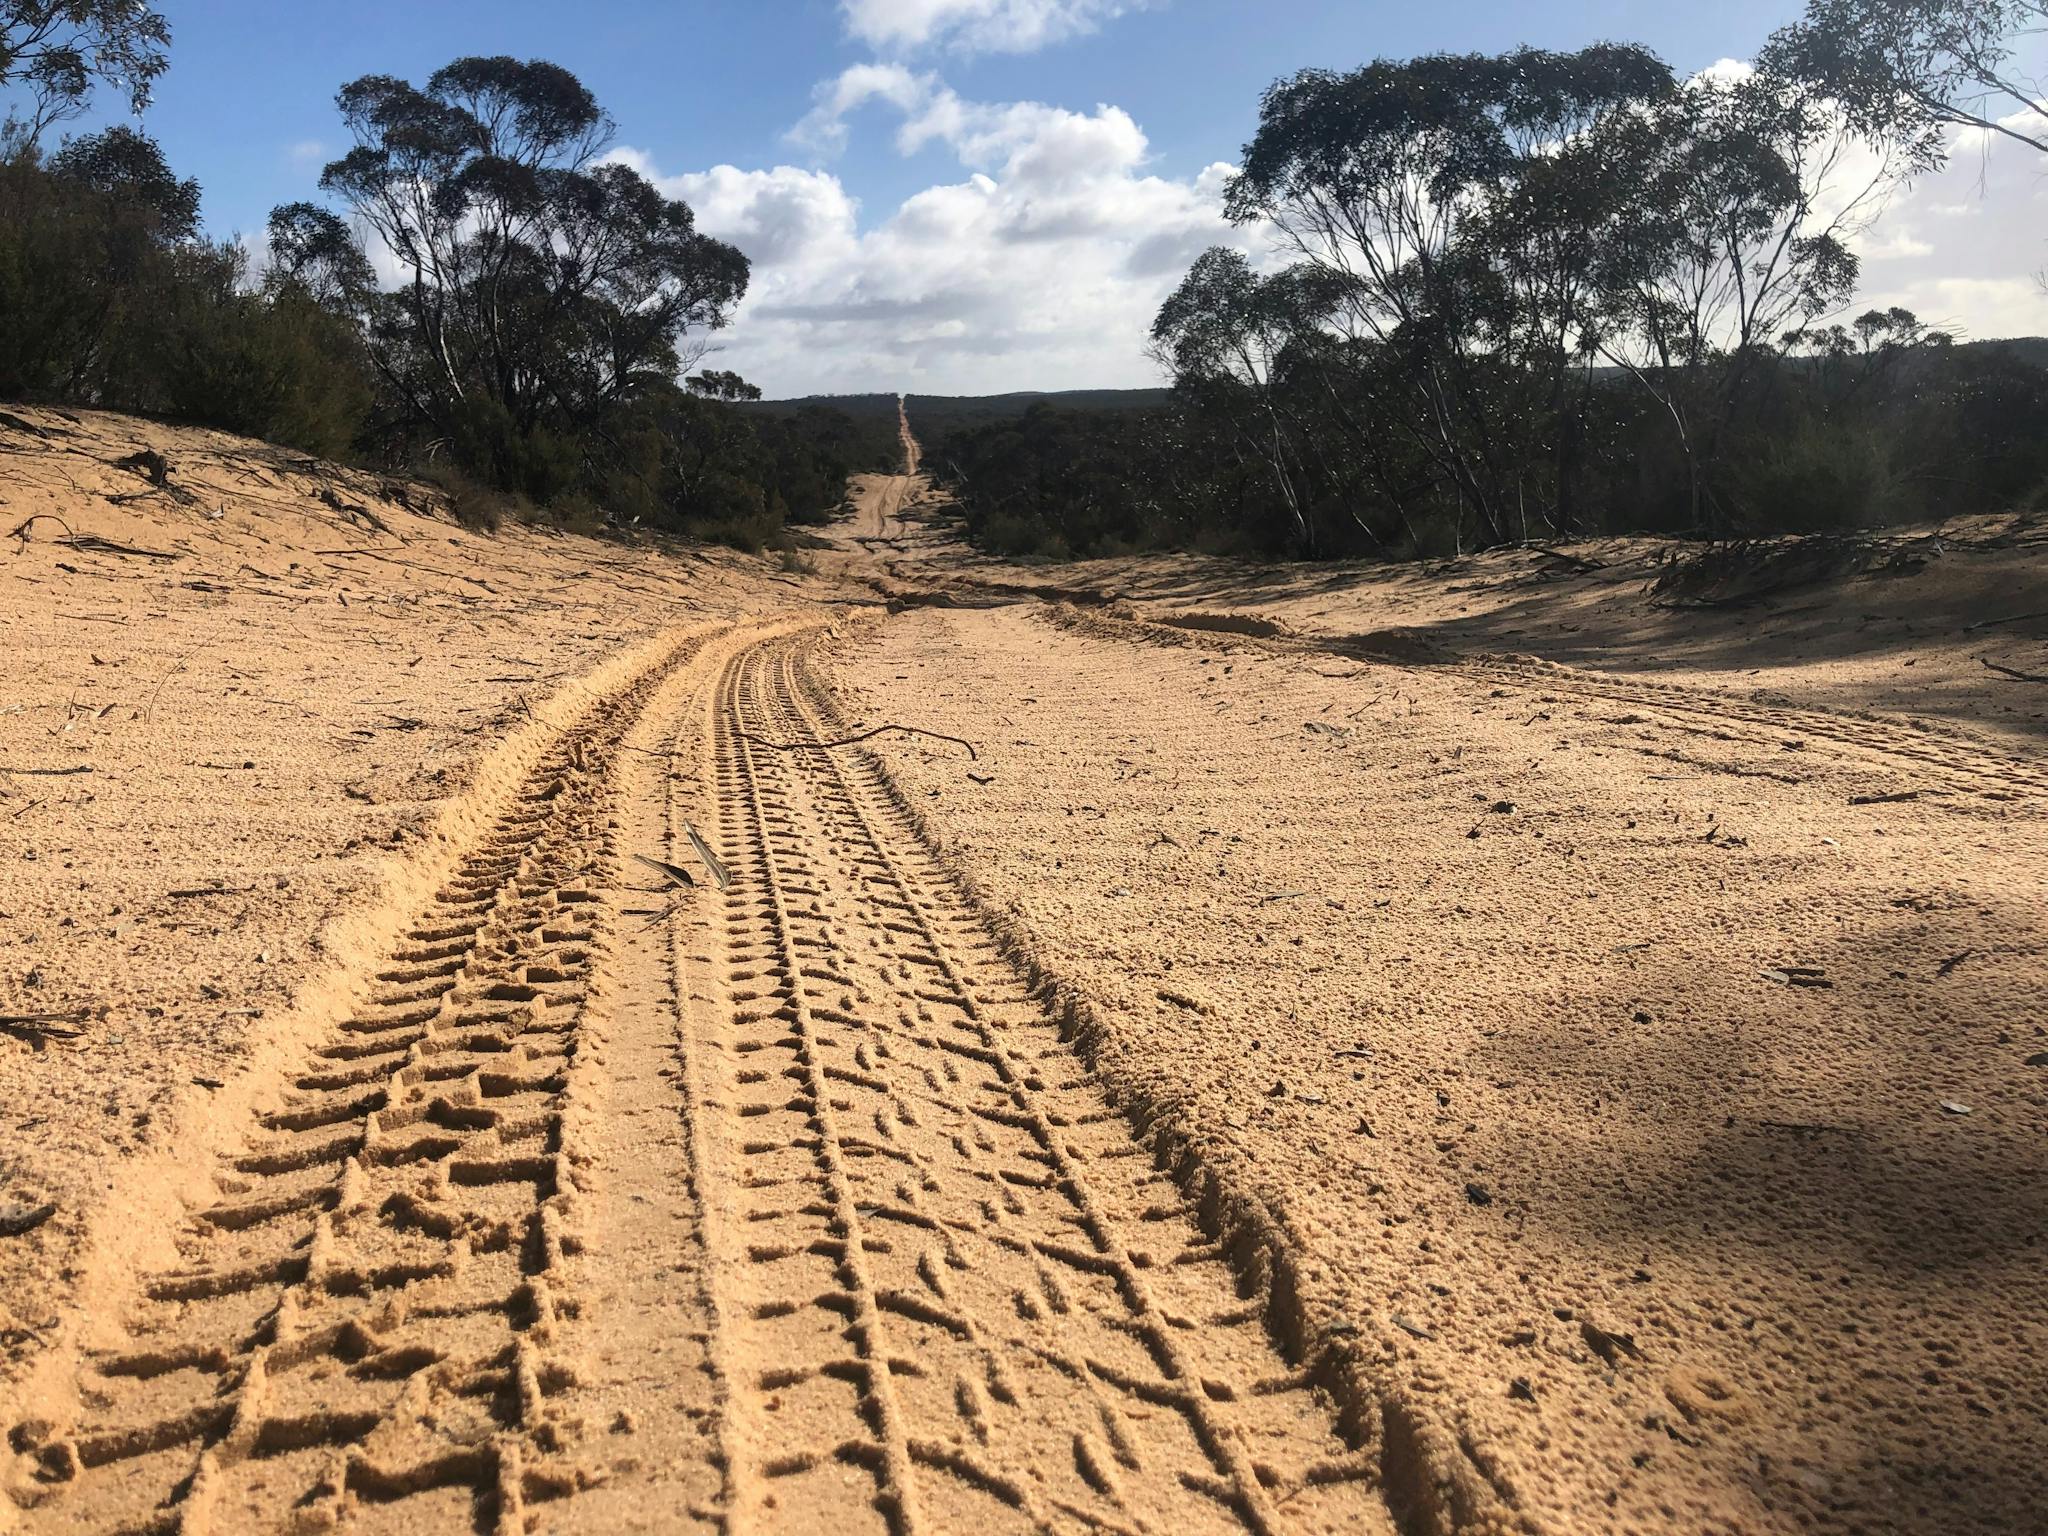 The Vic/Sa border track is known for its famous sandy dunes